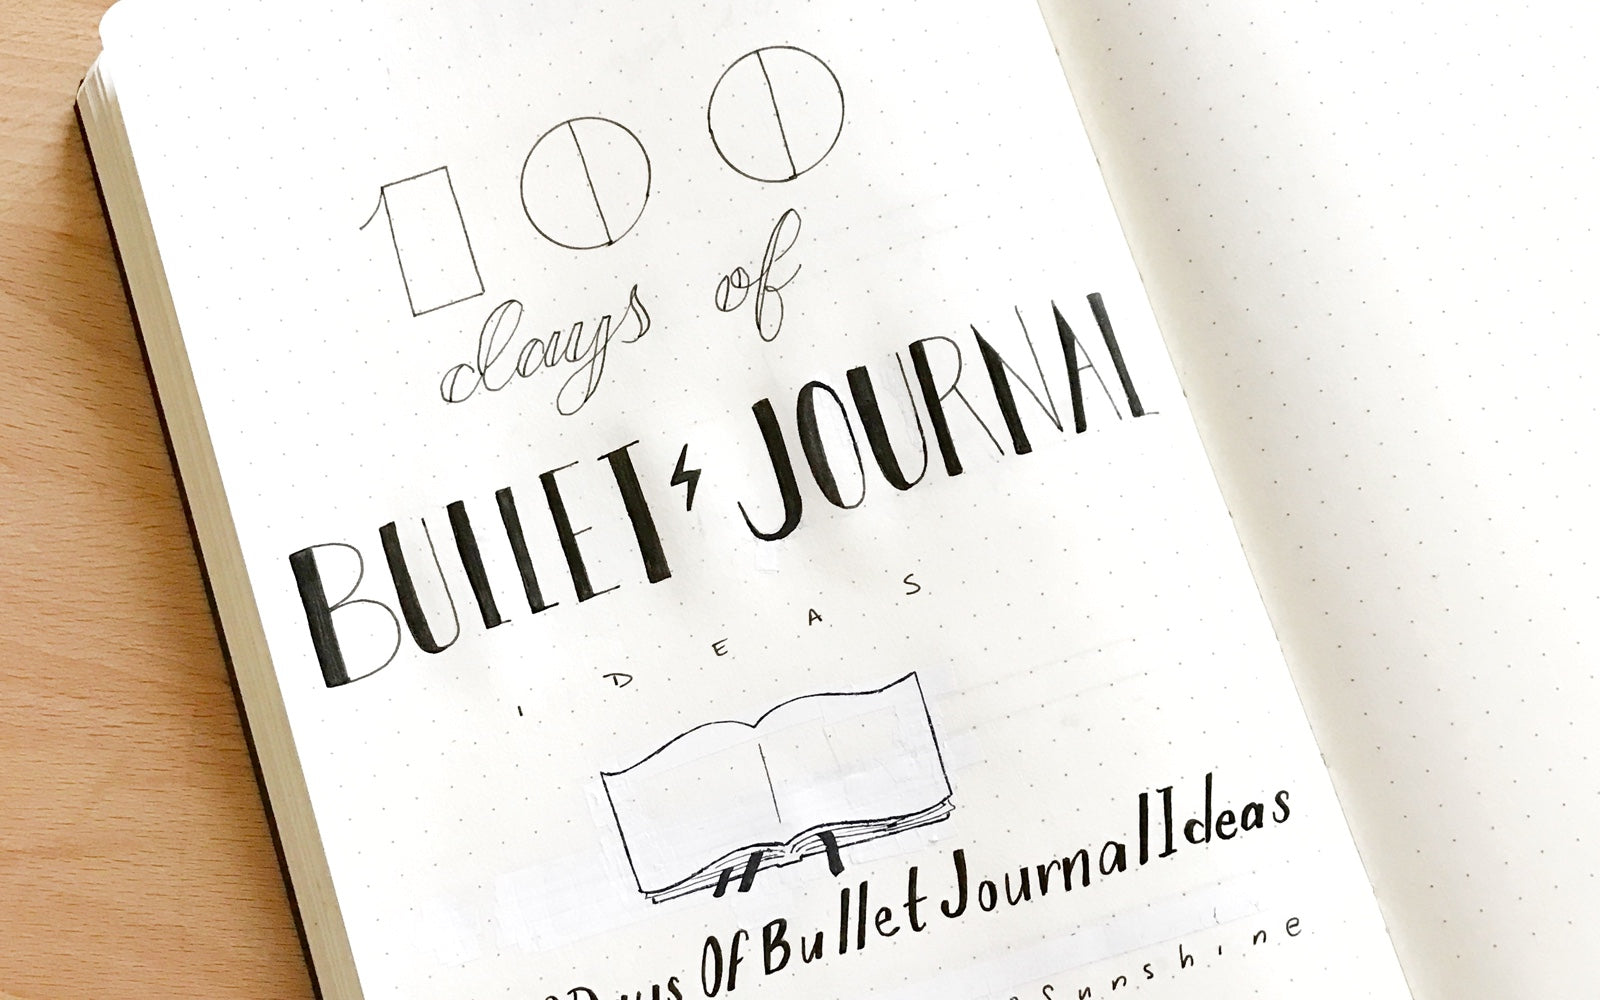 100 days of bullet journaling. An extension of the to-do list